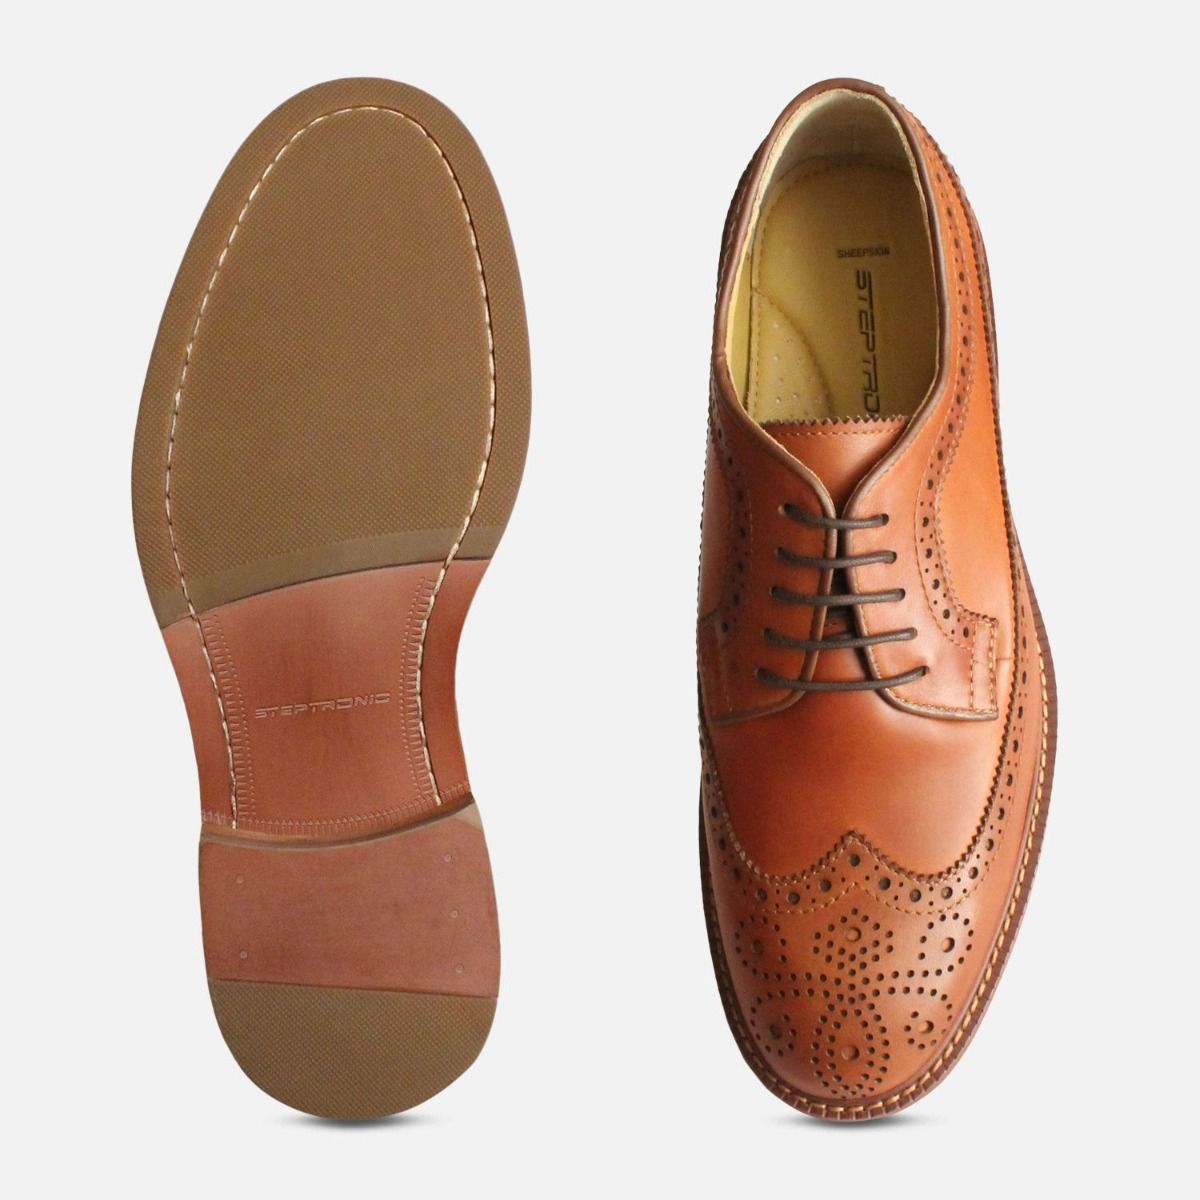 Steptronic Country Longwing Brogues in Tan Leather